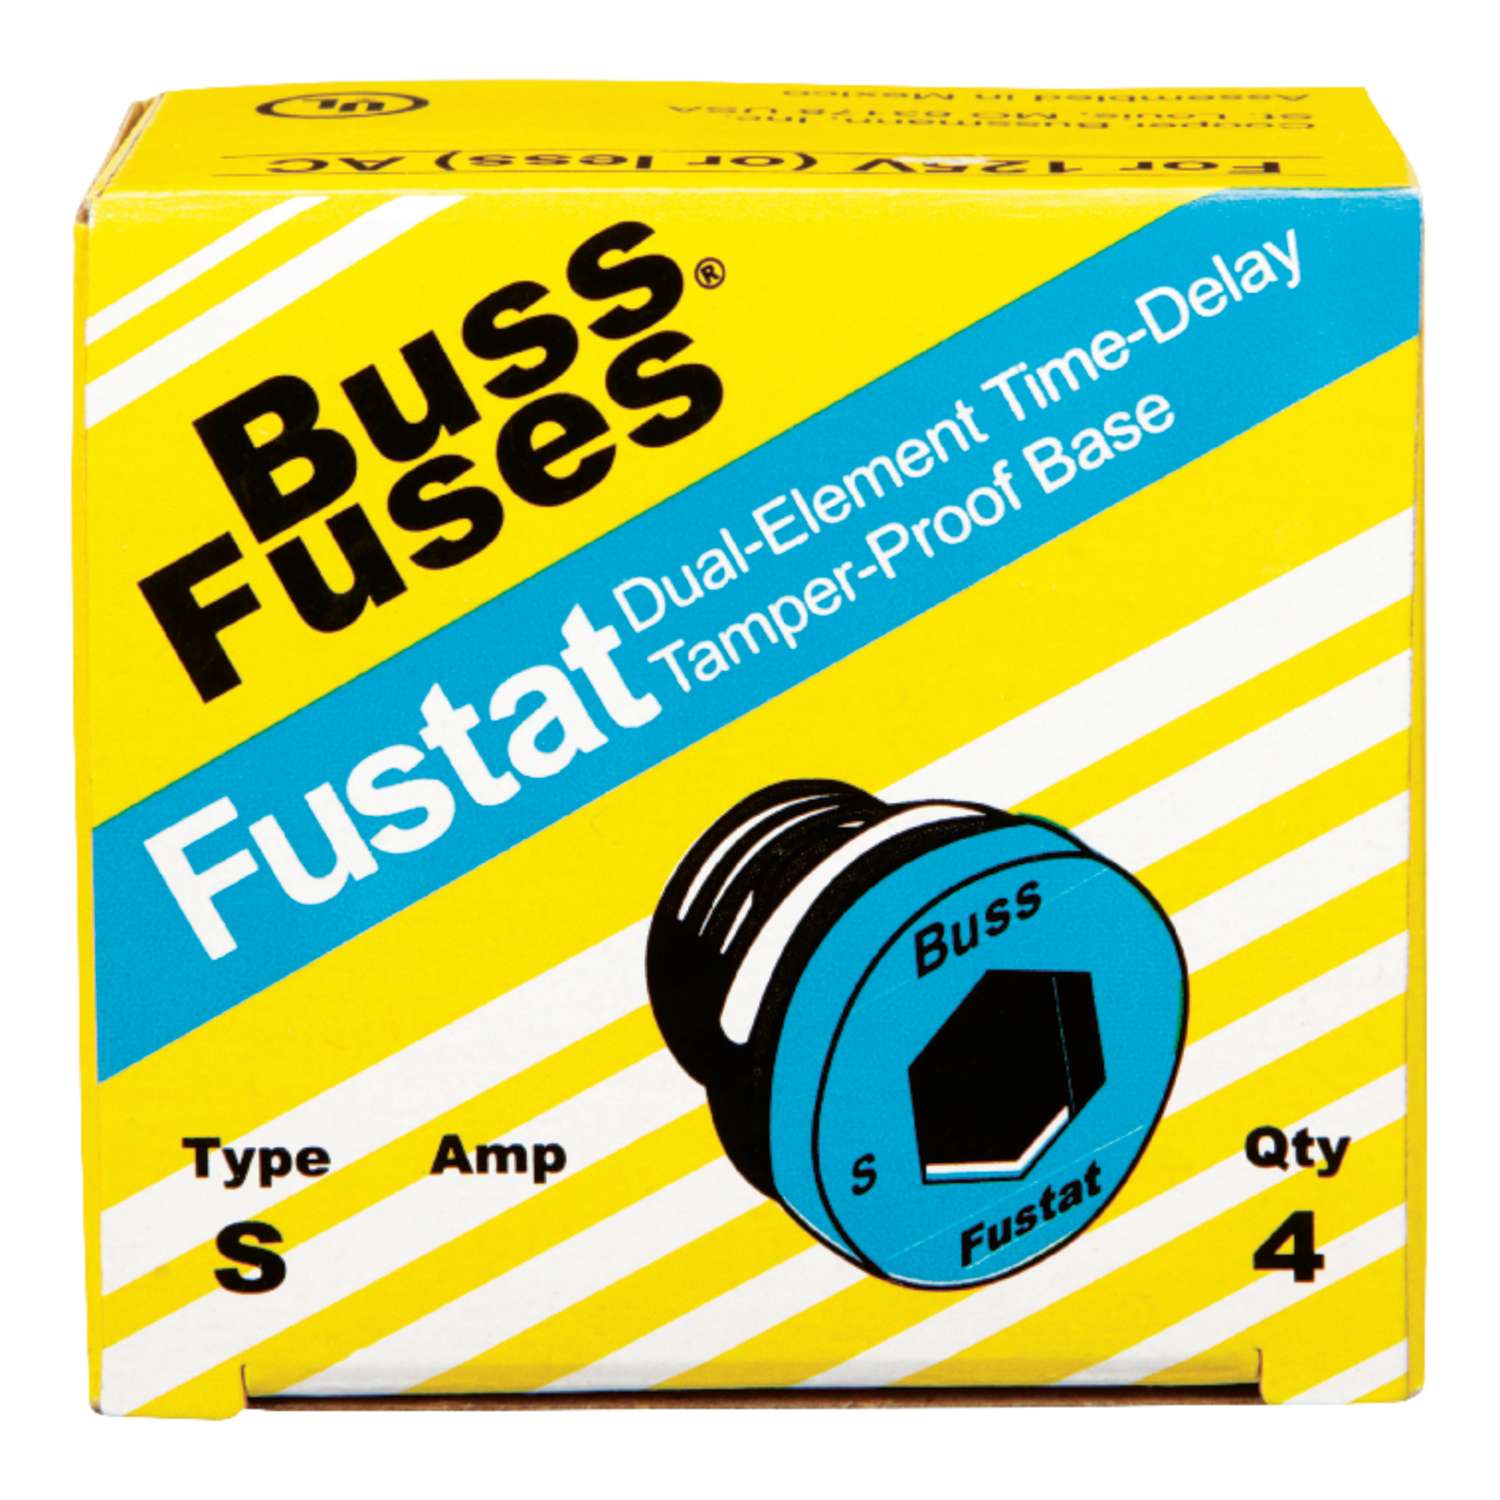 Lot of 11 Buss Fustat Type S 6 1/4 Amp Fuses FREE FIRST CLASS SHIPPING 